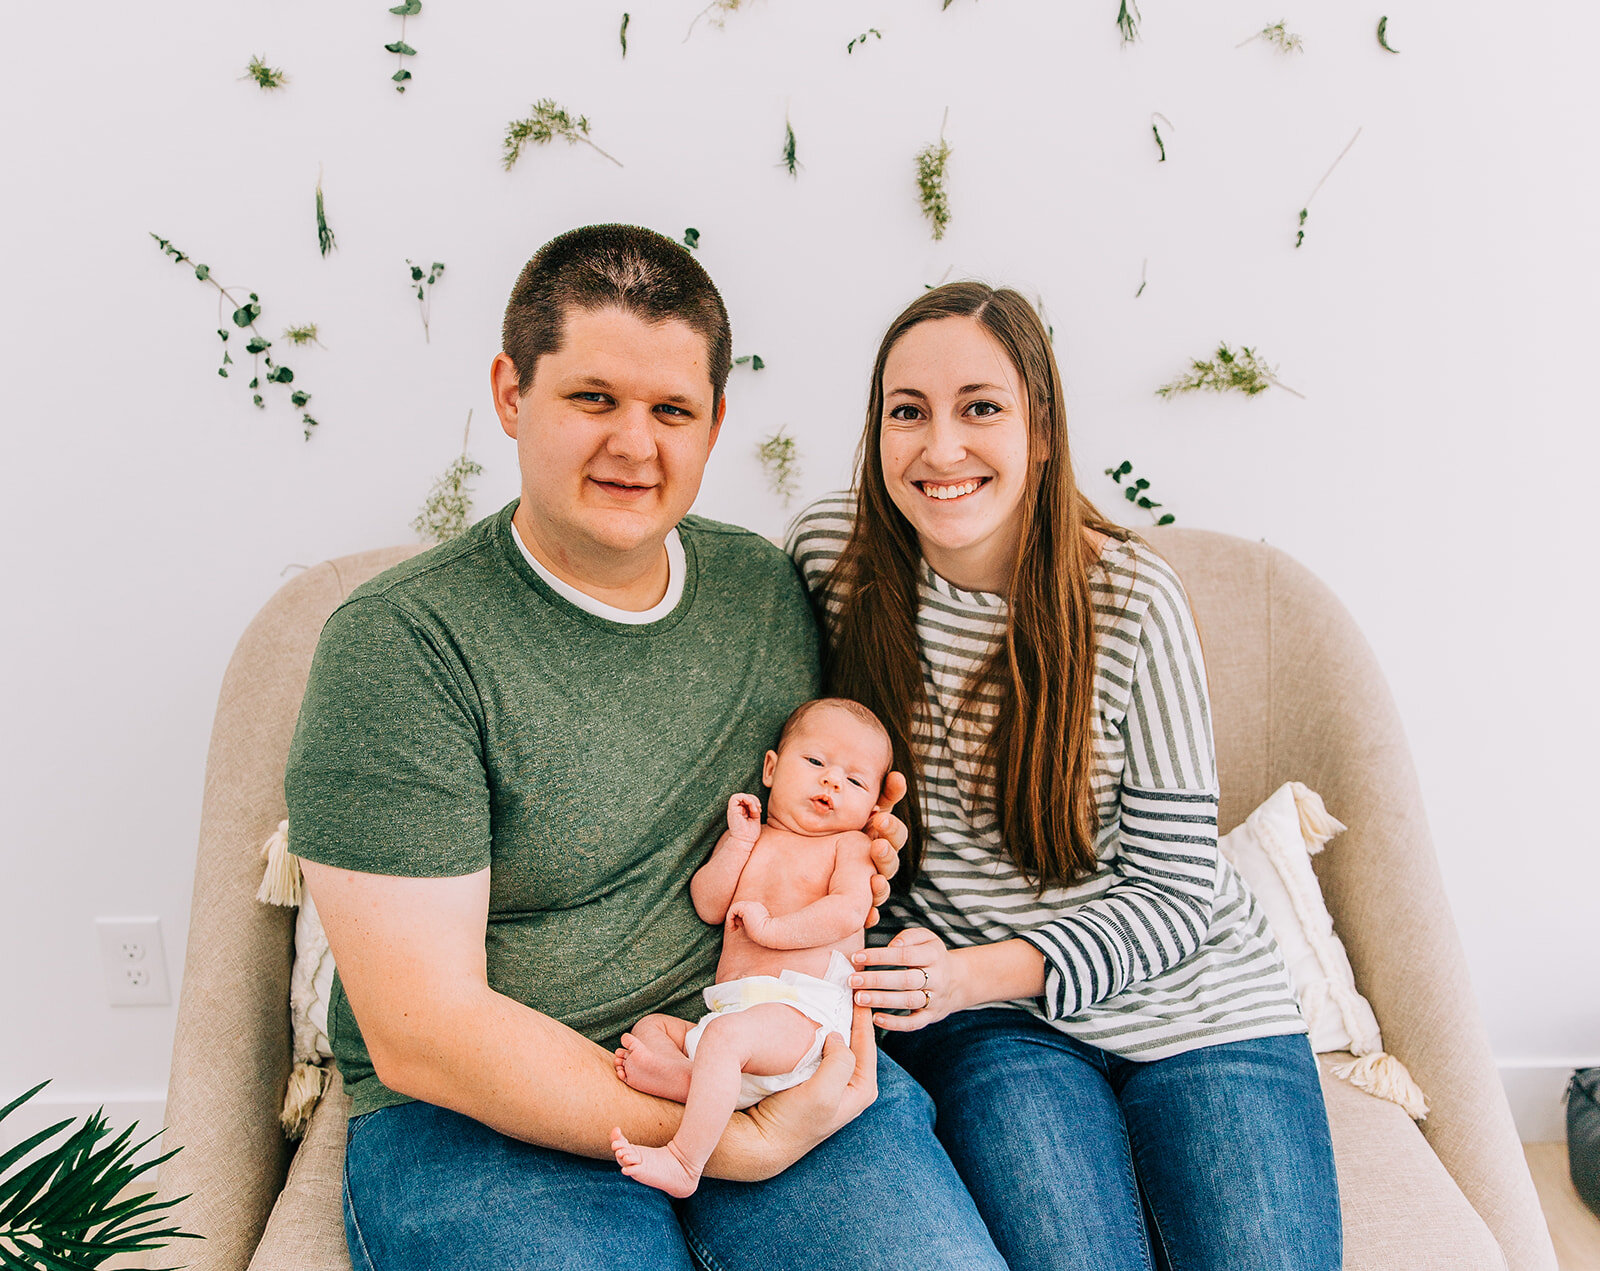  adorable baby pictures mom and dad cuddling baby newborn photo session professional photographers in cache valley logan utah family photographers bella alder photography baby cuddles chunky cheeks baby toes naked baby pose inspo mom and dad holding 